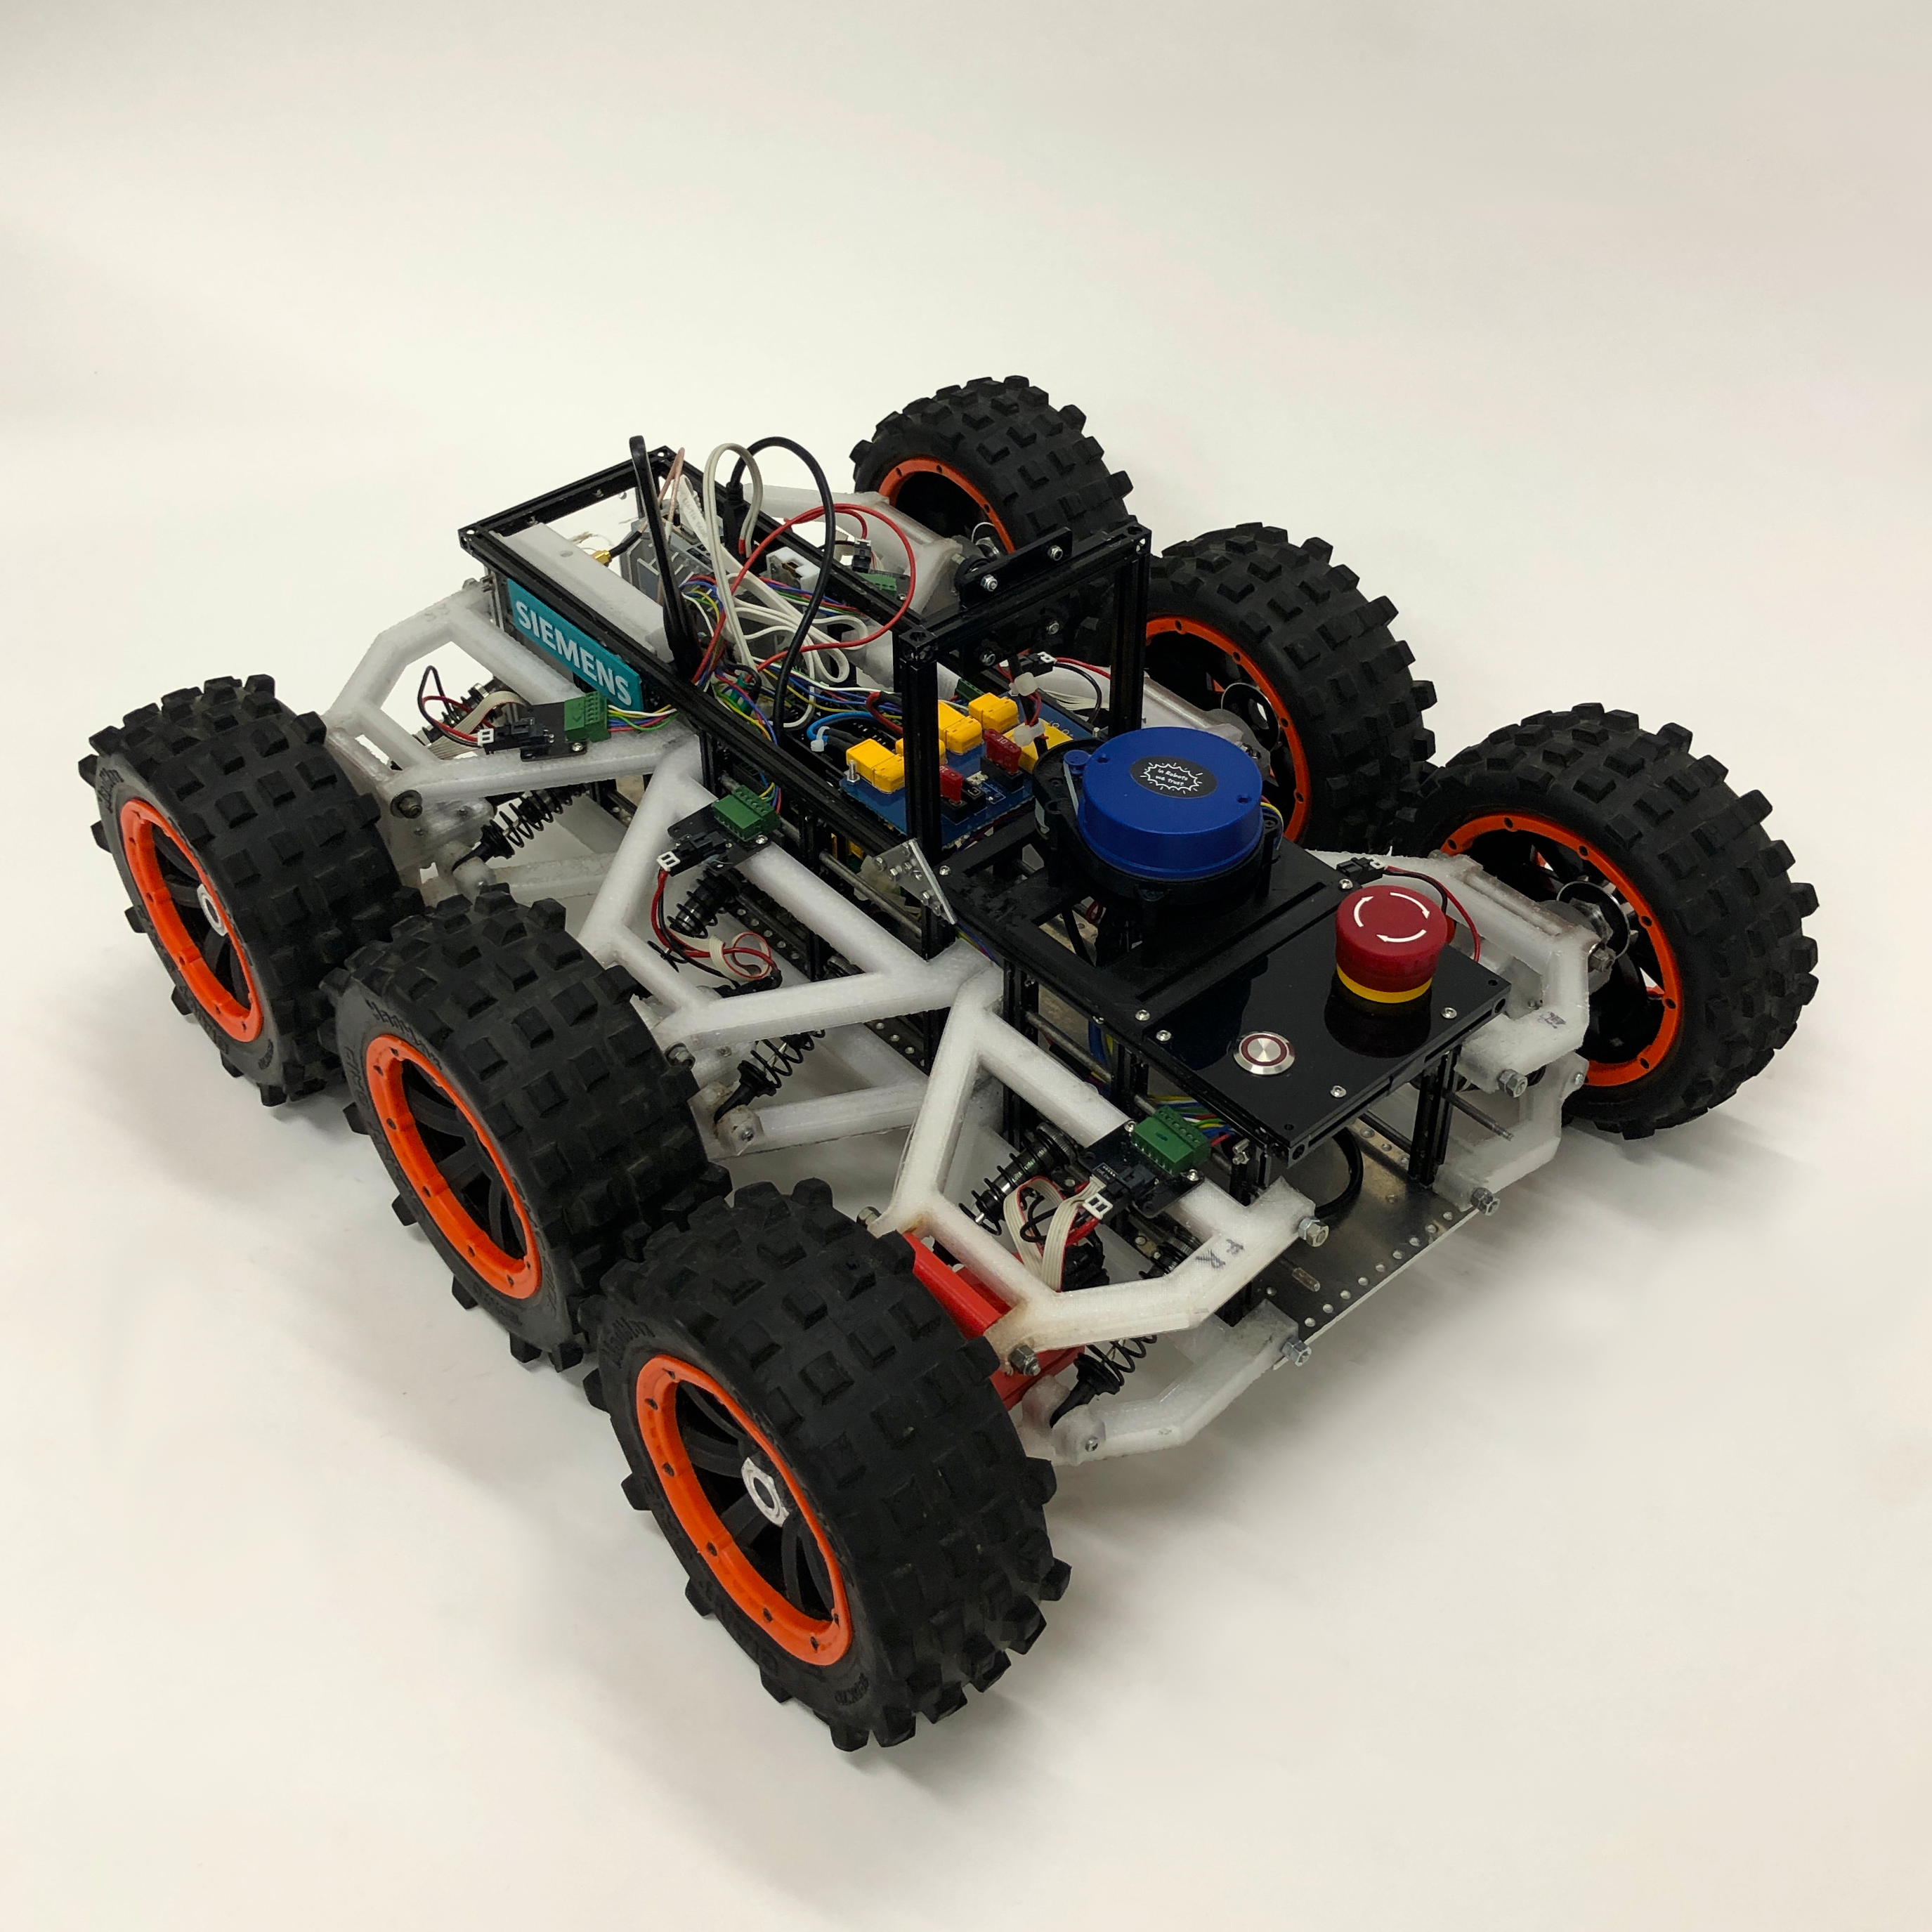 Image of our Robot 'Error 404'